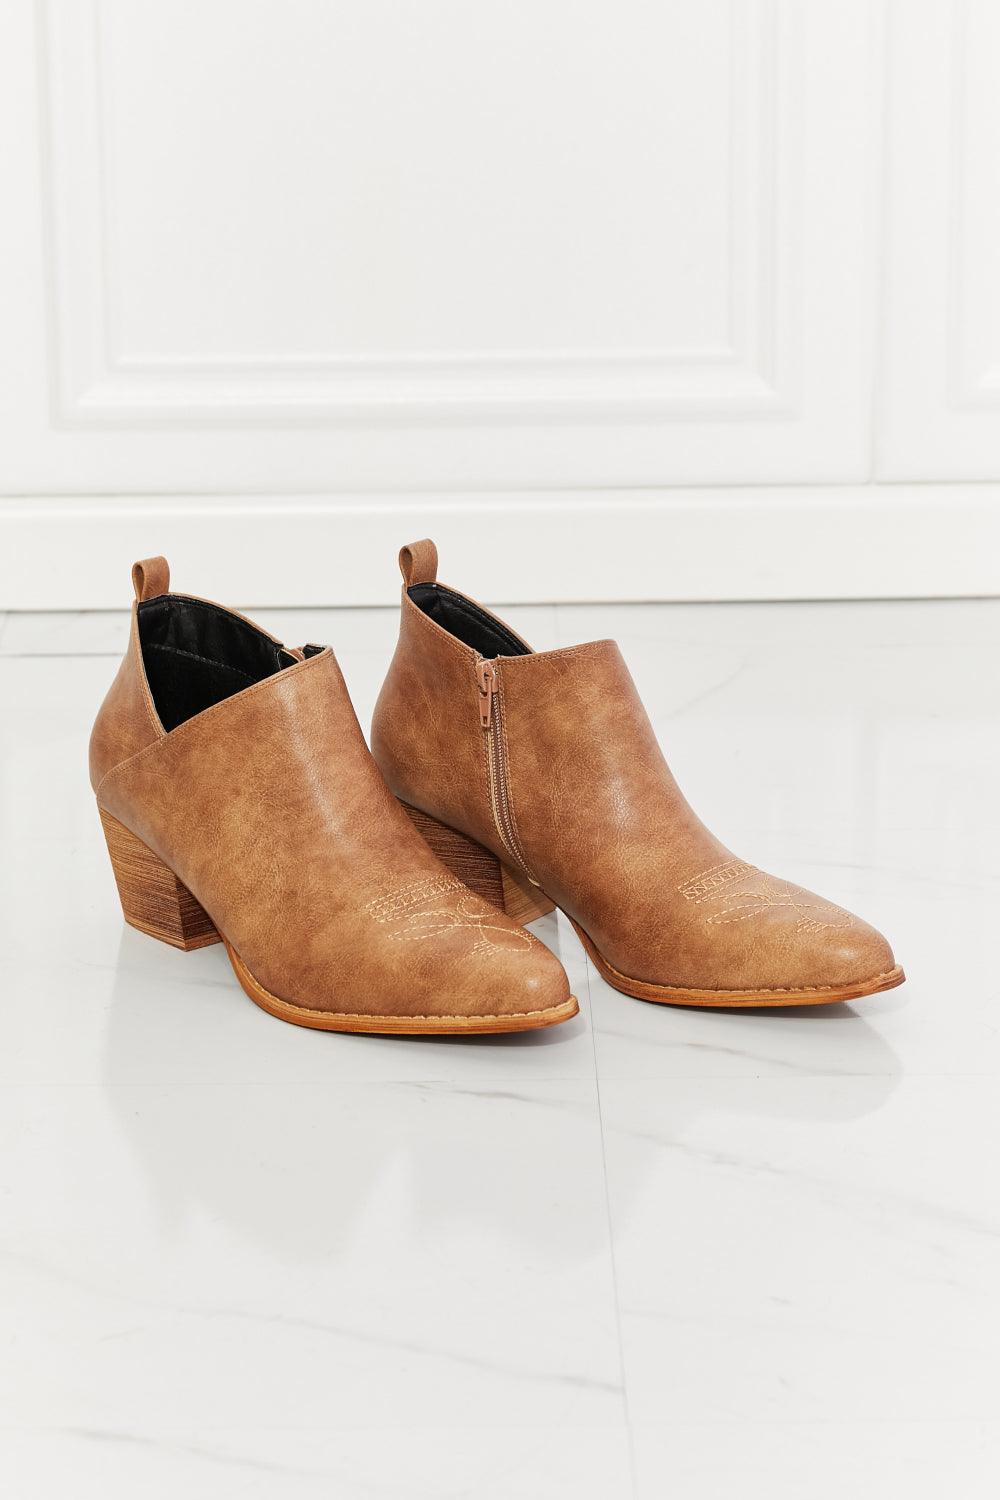 Trust Yourself Embroidered Crossover Cowboy Bootie in Caramel - Studio 653